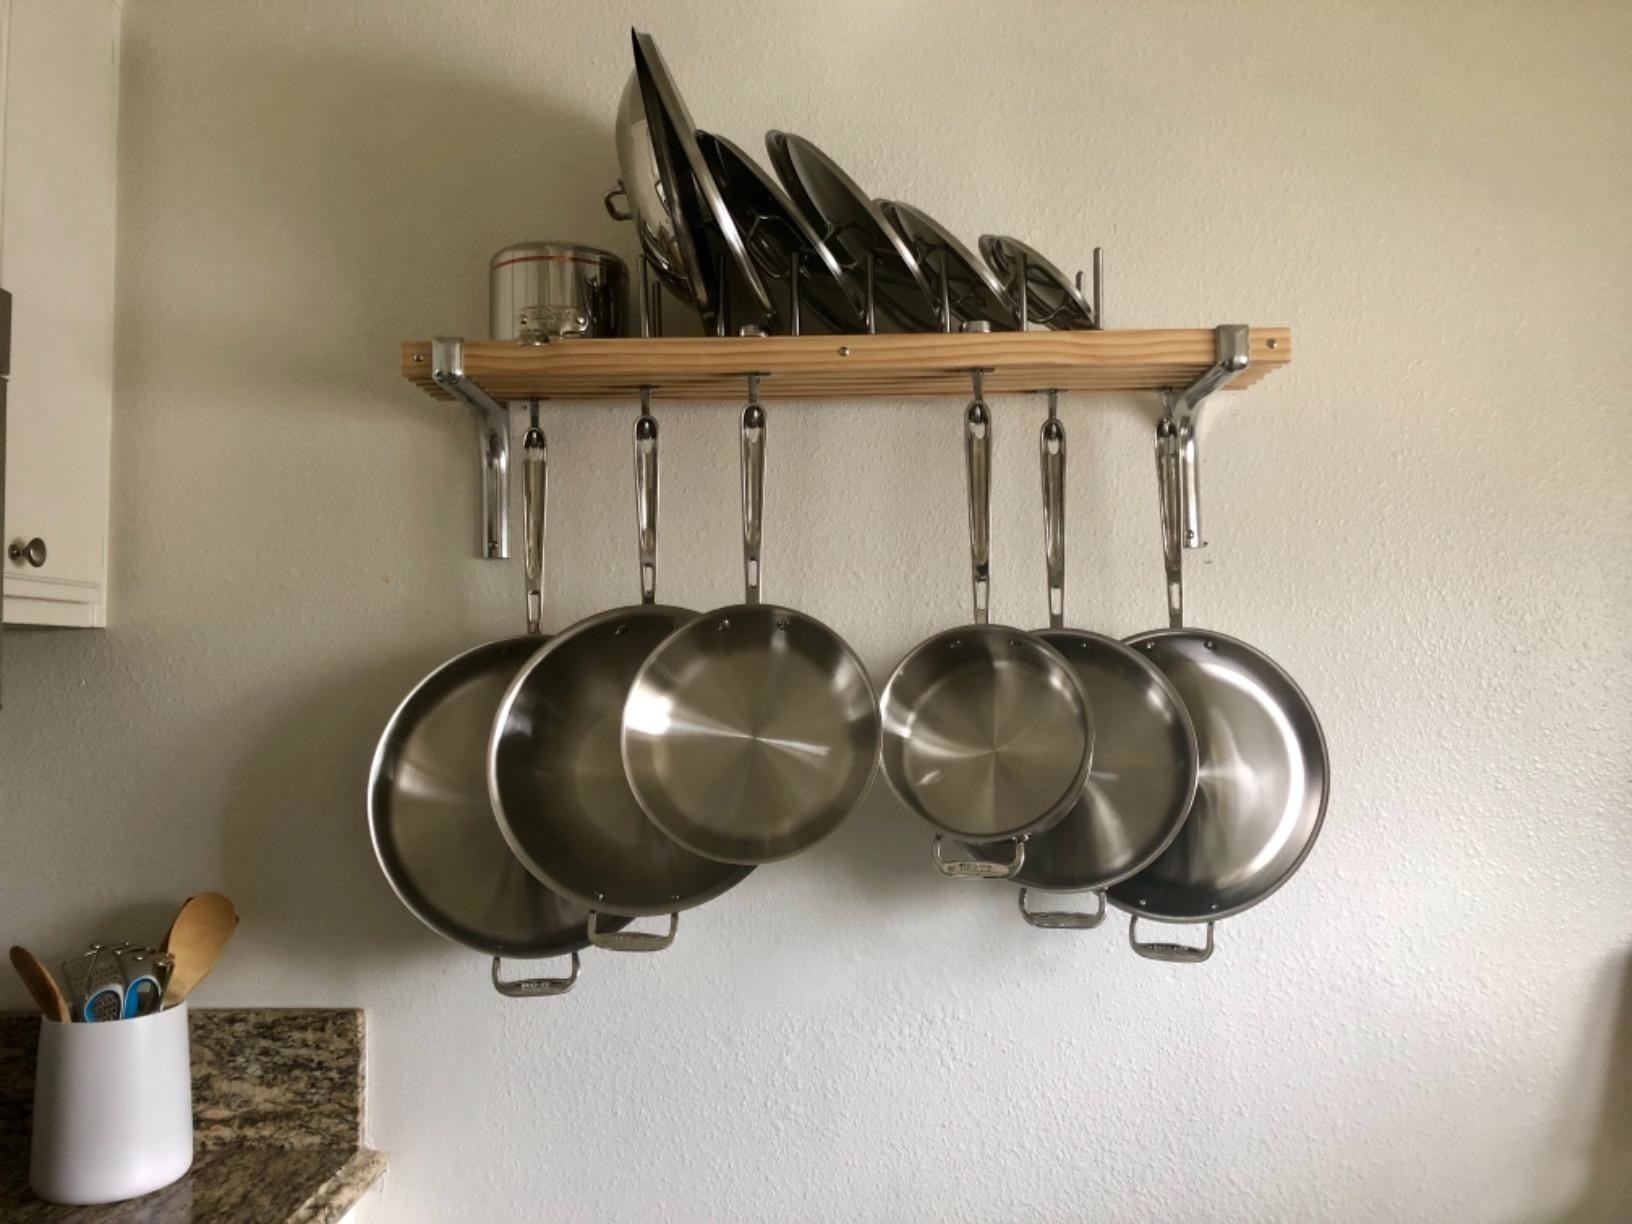 Source Pot Rack Wall-mounted,2-layer And Pan Hanging Rack Storage Rack With  16 Hooks For Kitchen Utensils Organization on m.